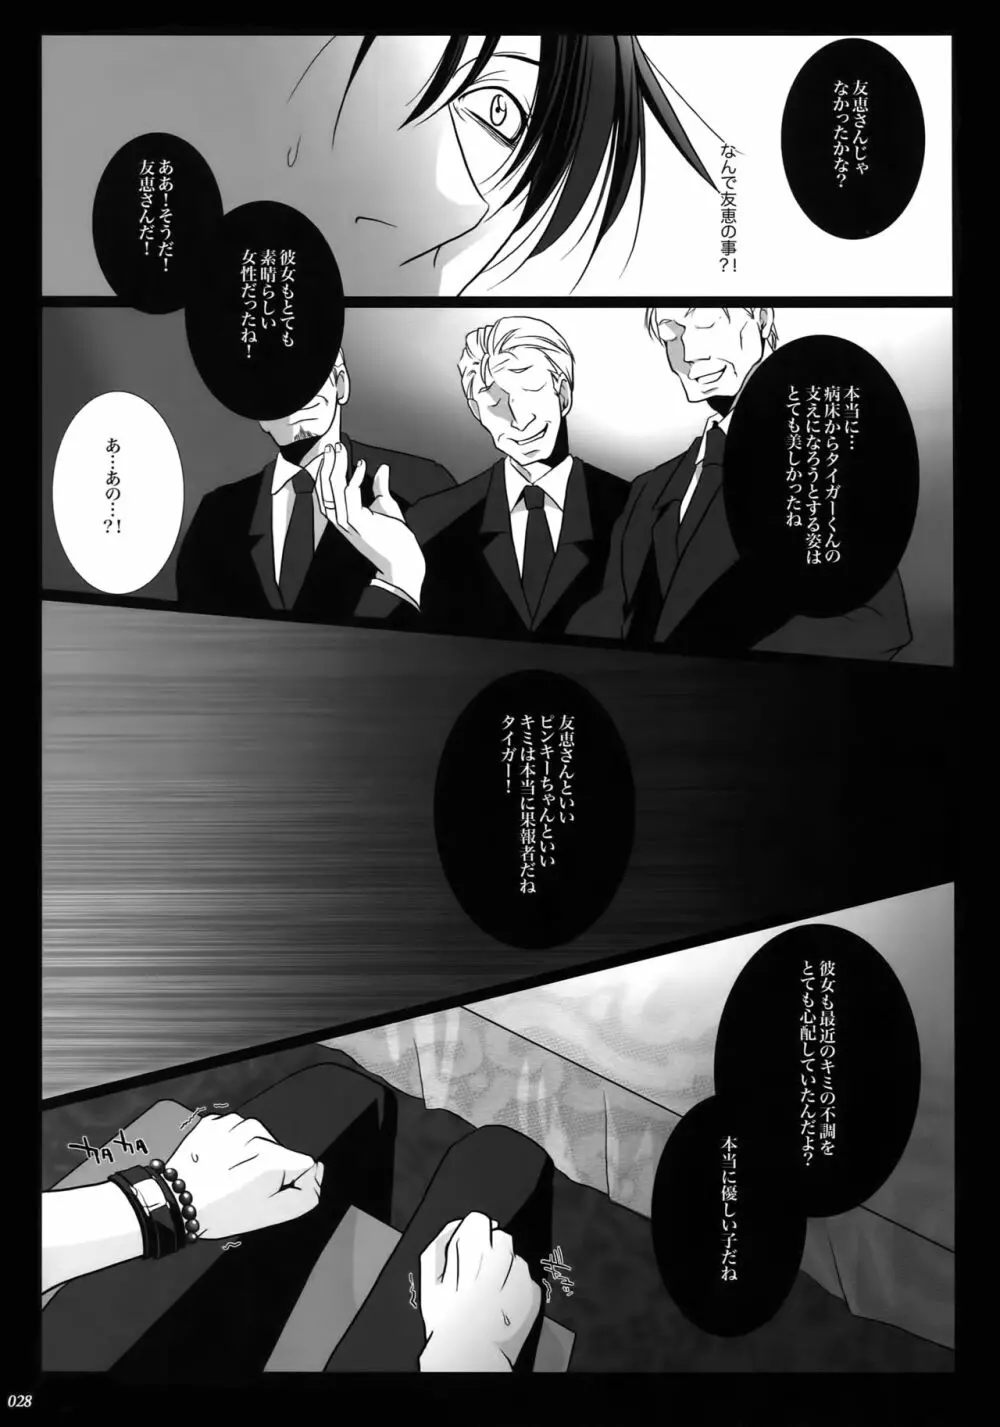 mob;Re - page27